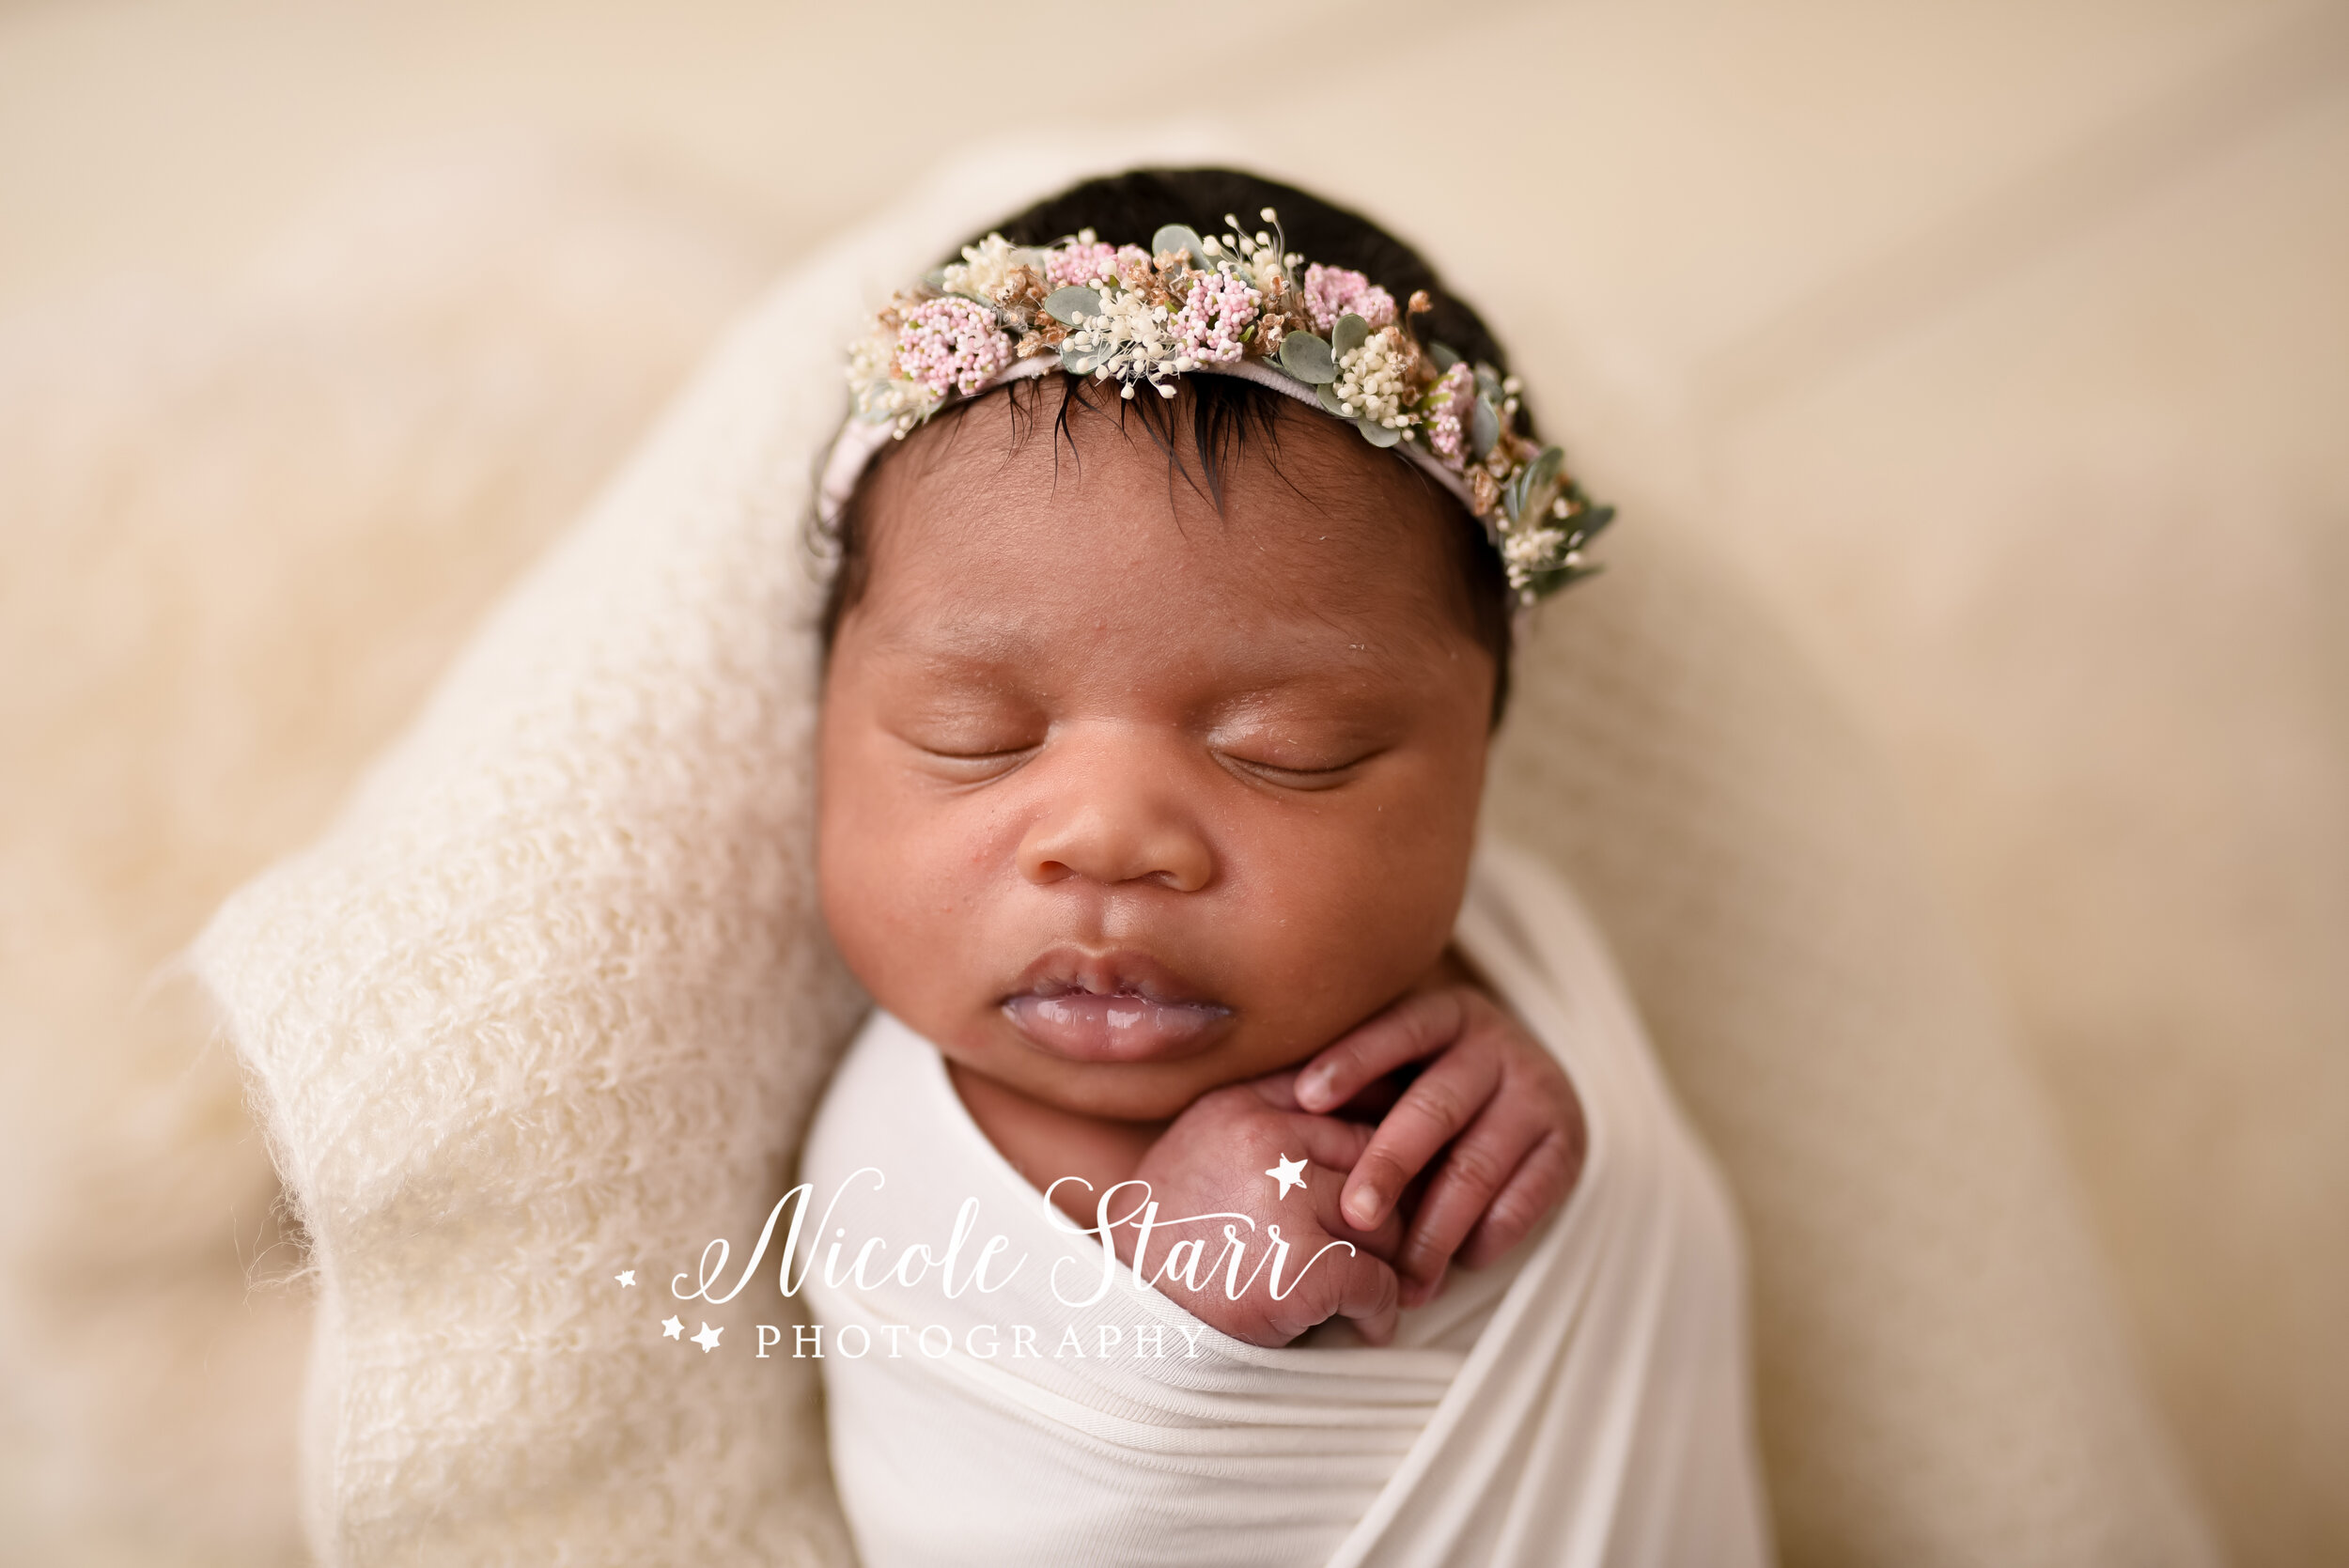 Floral Crowns and Lace - Gorgeous Newborn Portraits for a Baby Girl —  Saratoga Springs Baby Photographer, Nicole Starr Photography